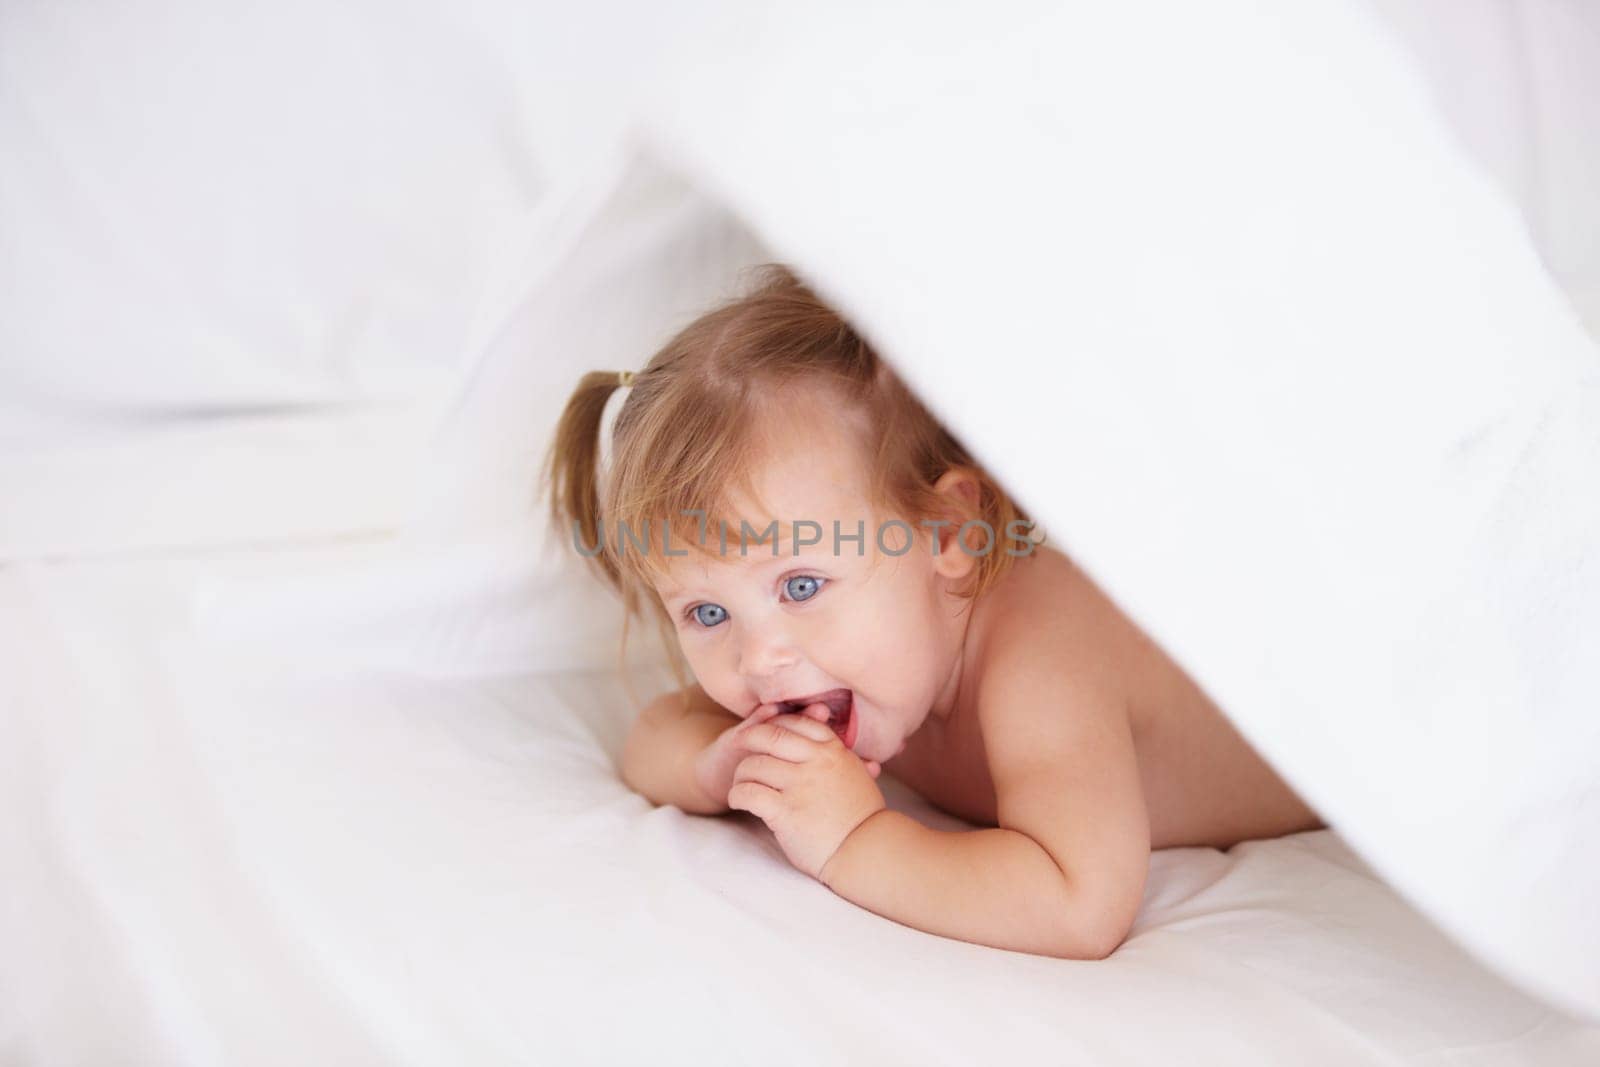 Home, growth and child development with a baby in the bedroom to relax alone in the morning. Happy, kids or youth and an adorable young infant girl on a bed with blankets for comfort in an apartment.